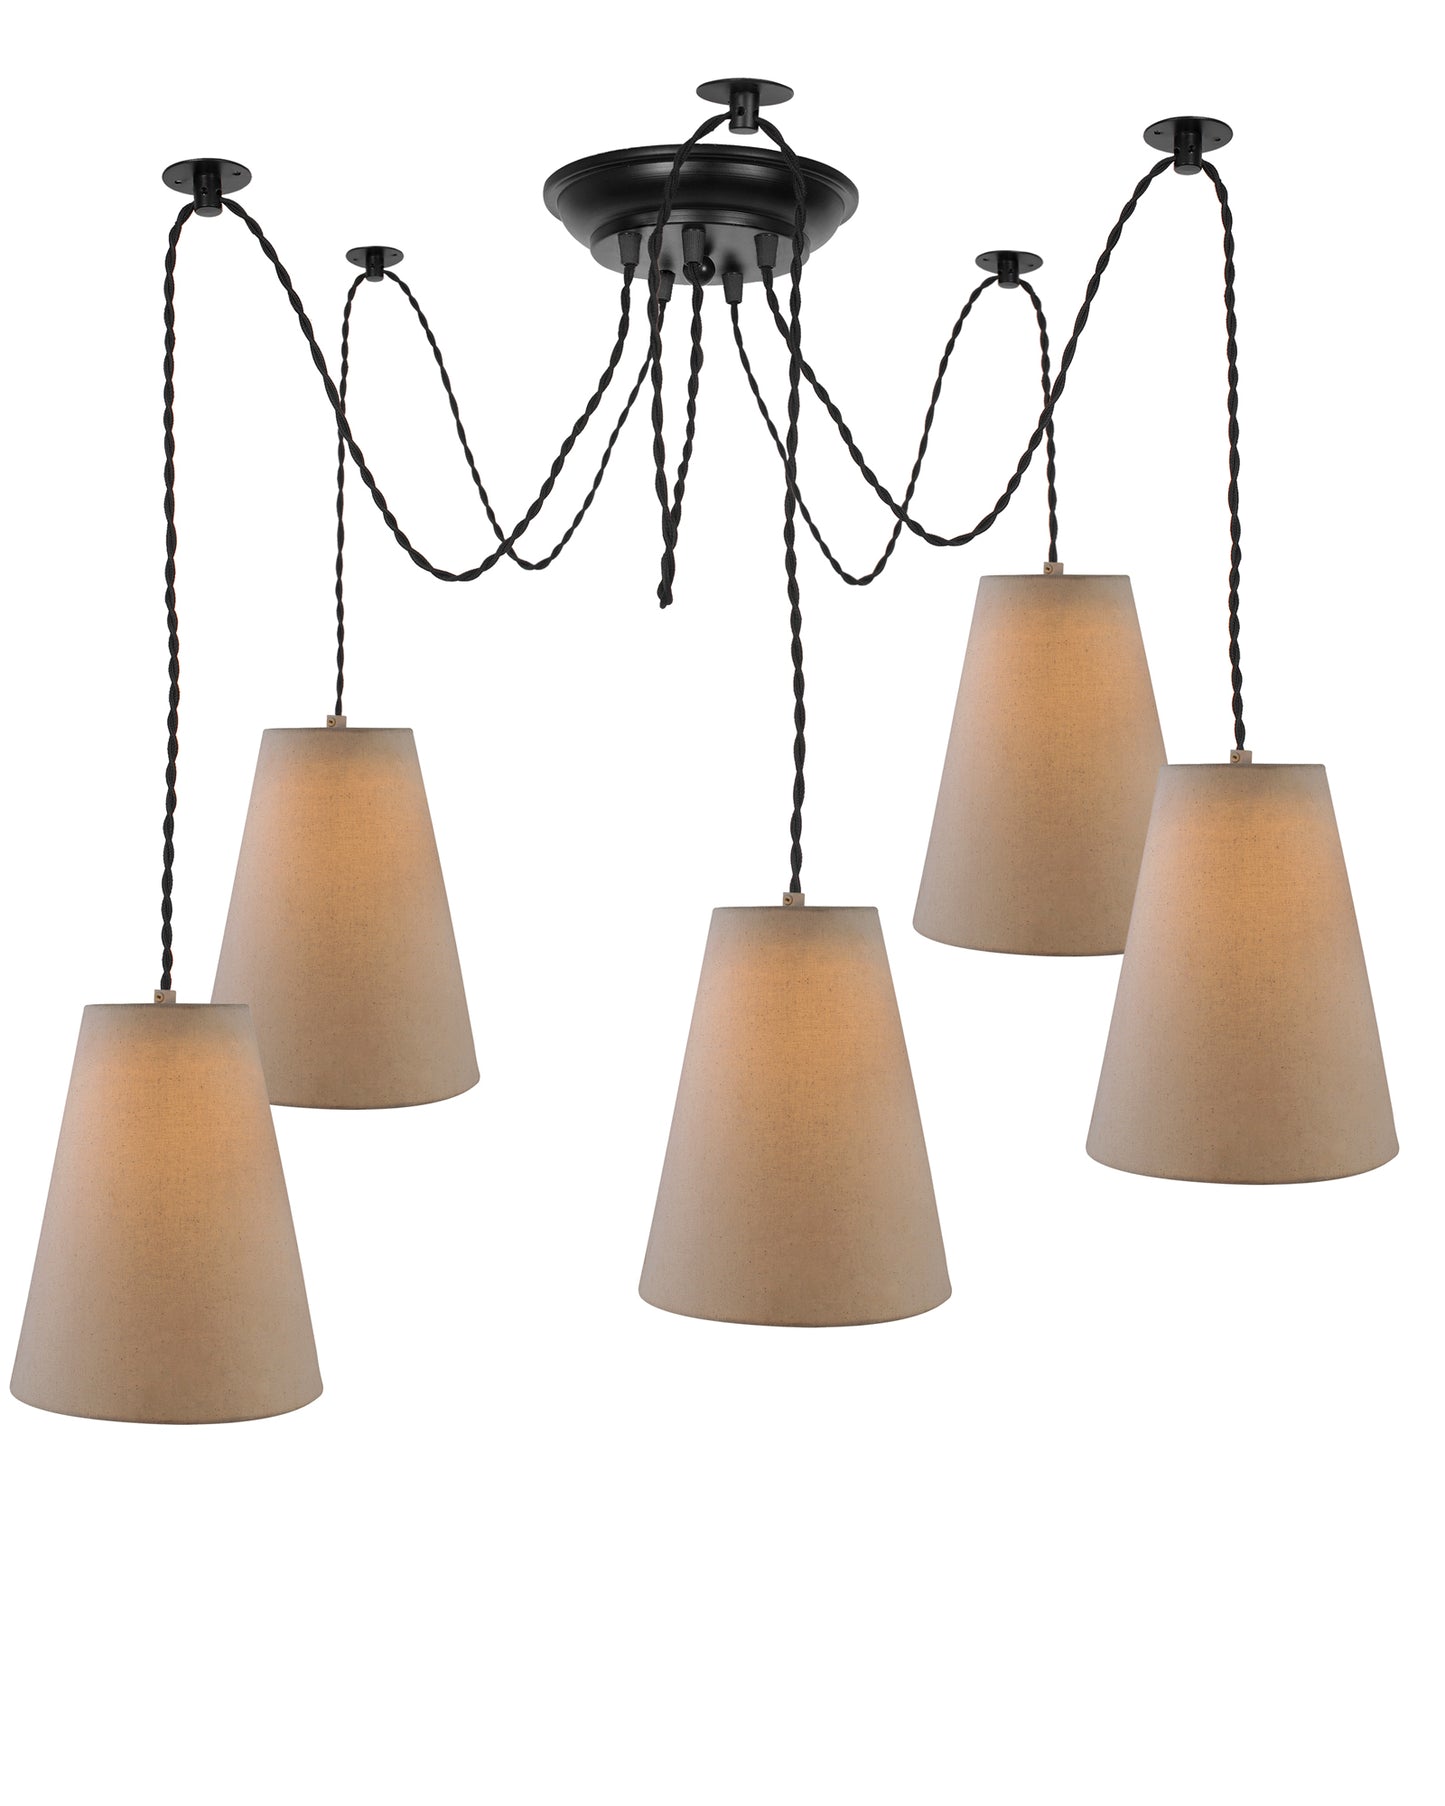 3 Arms Spider Chandelier Lamp, Fabric Cone Shade, Vintage Edison Style E 27 Adjustable DIY Ceiling Pendant Light, E27 Rustic Cluster Hanging Light(1.25 M, Black Twisted Wire)